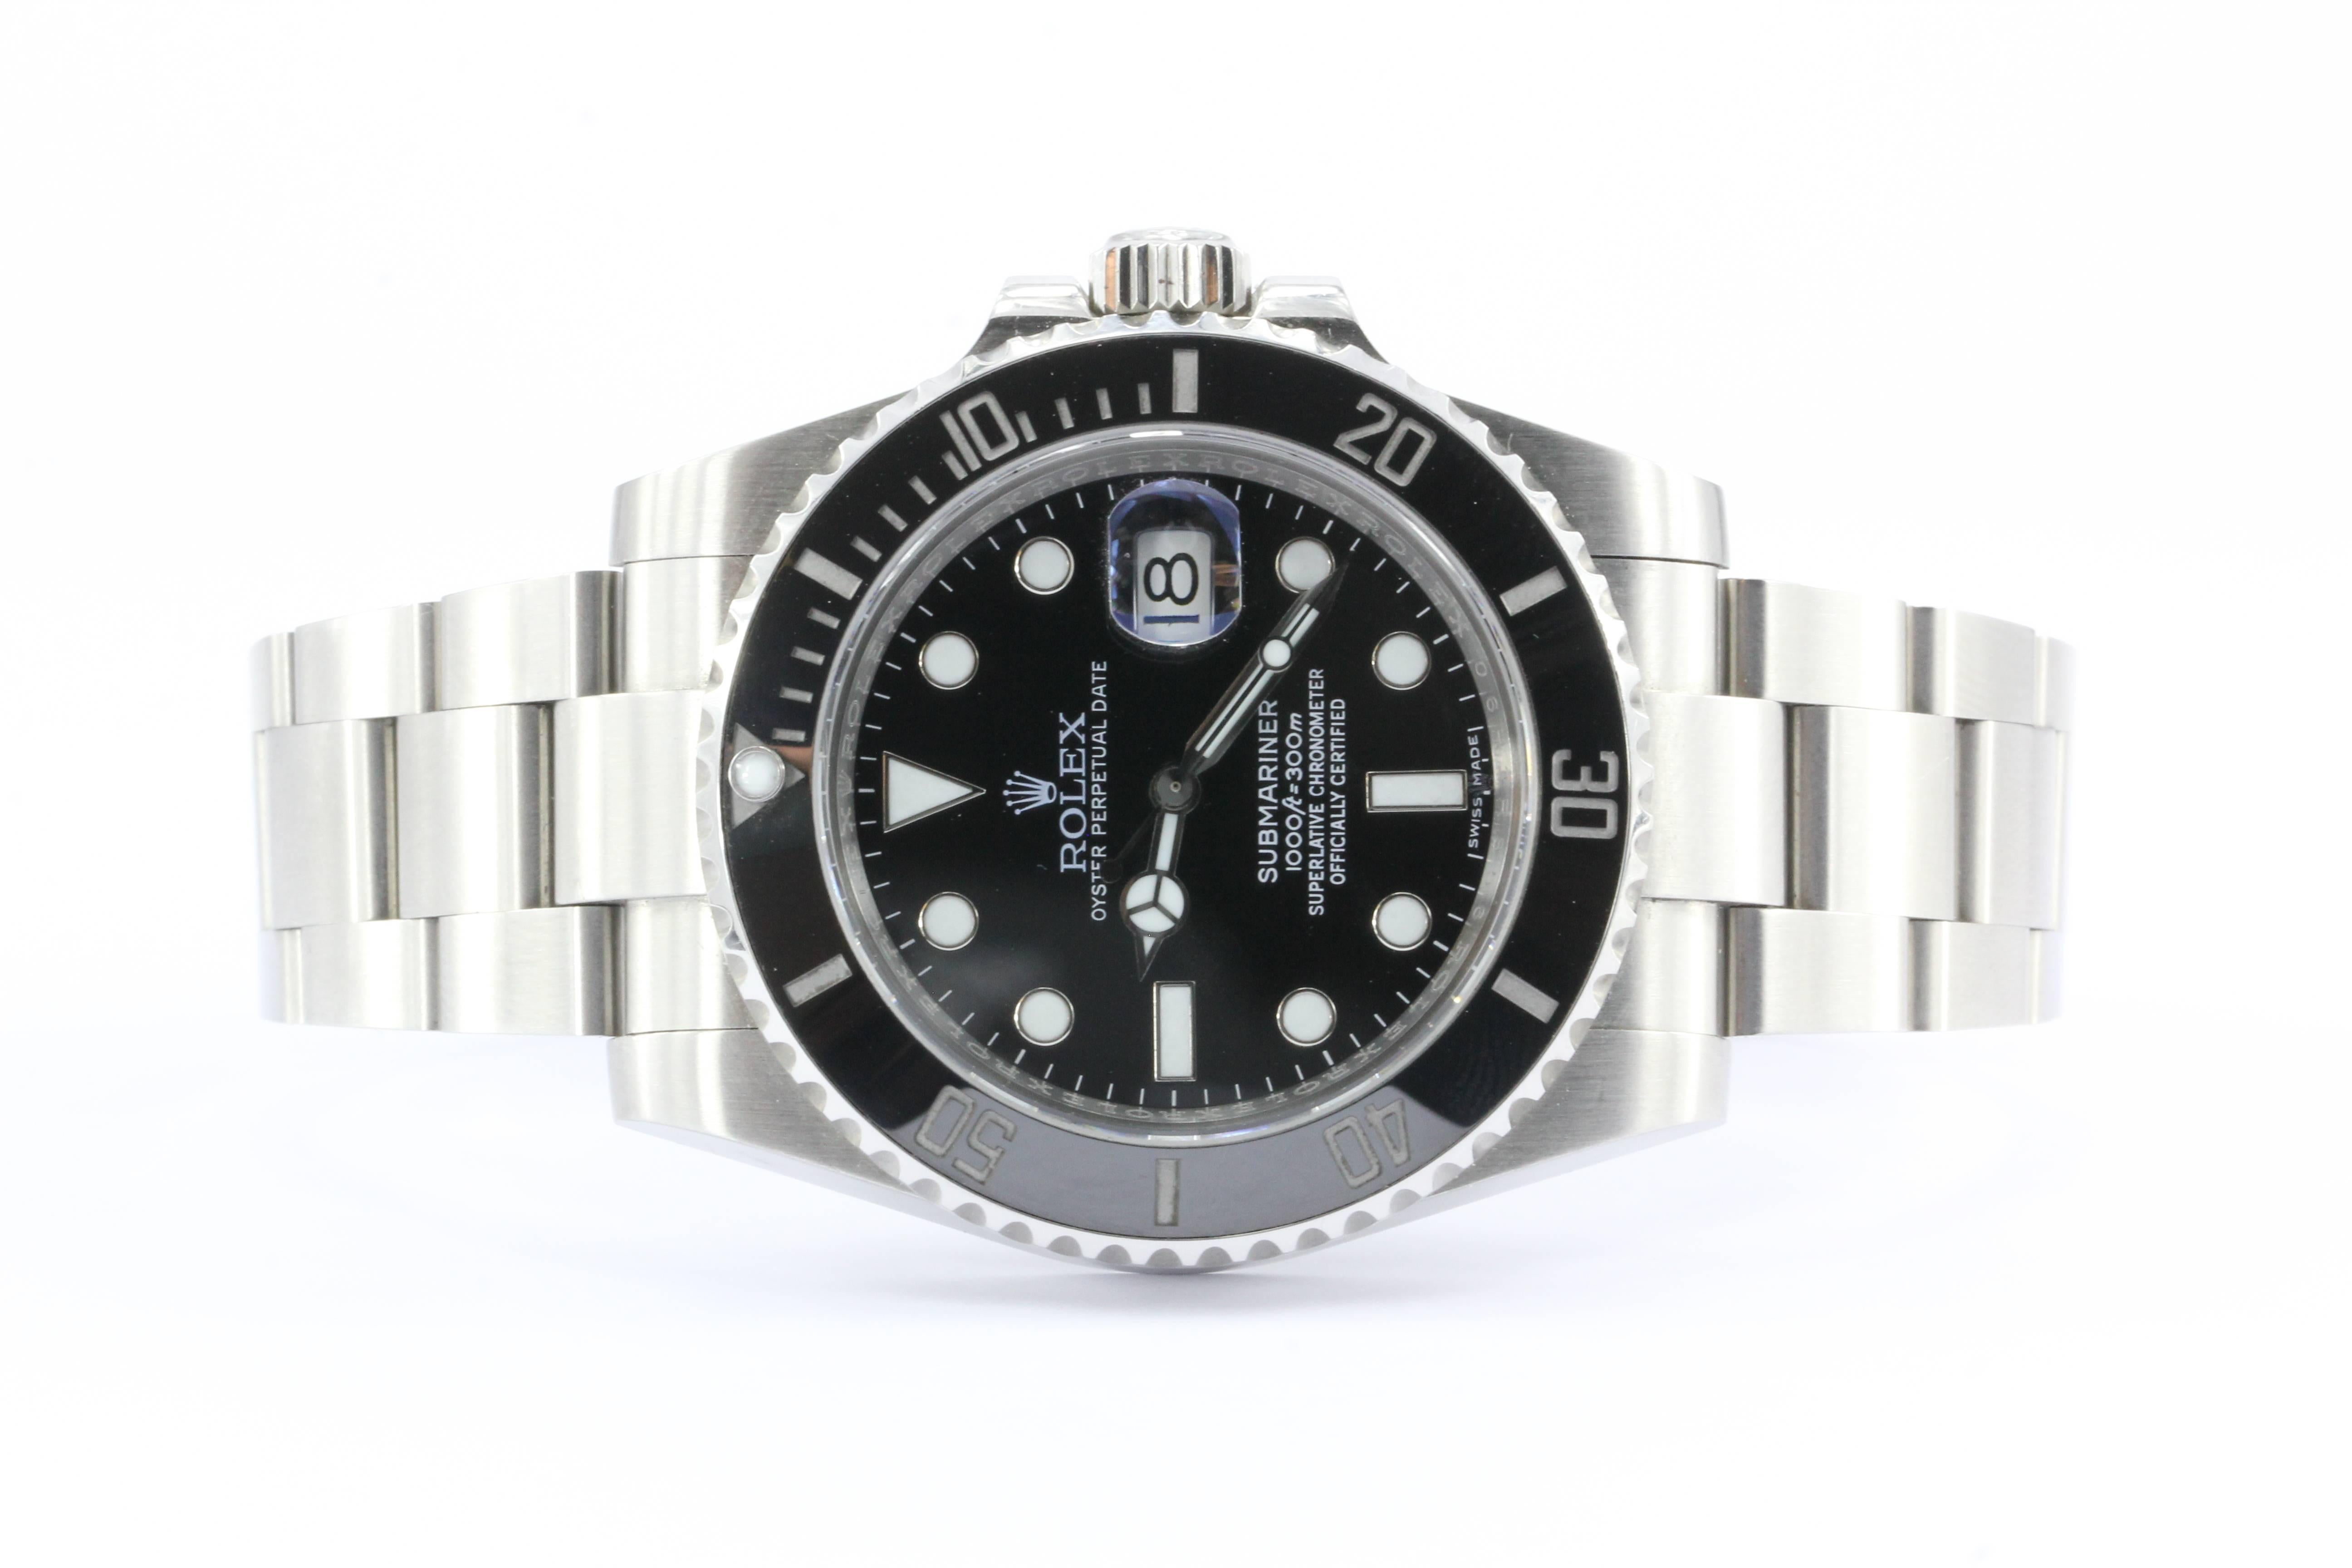 Rolex Oyster Submariner Perpetual Date Mens Black Dial & Bezel Steel Mens Watch. The watch is in excellent gently used estate condition and ready to wear. It has just about no signs of previous use. It does not come with its box or paperwork.